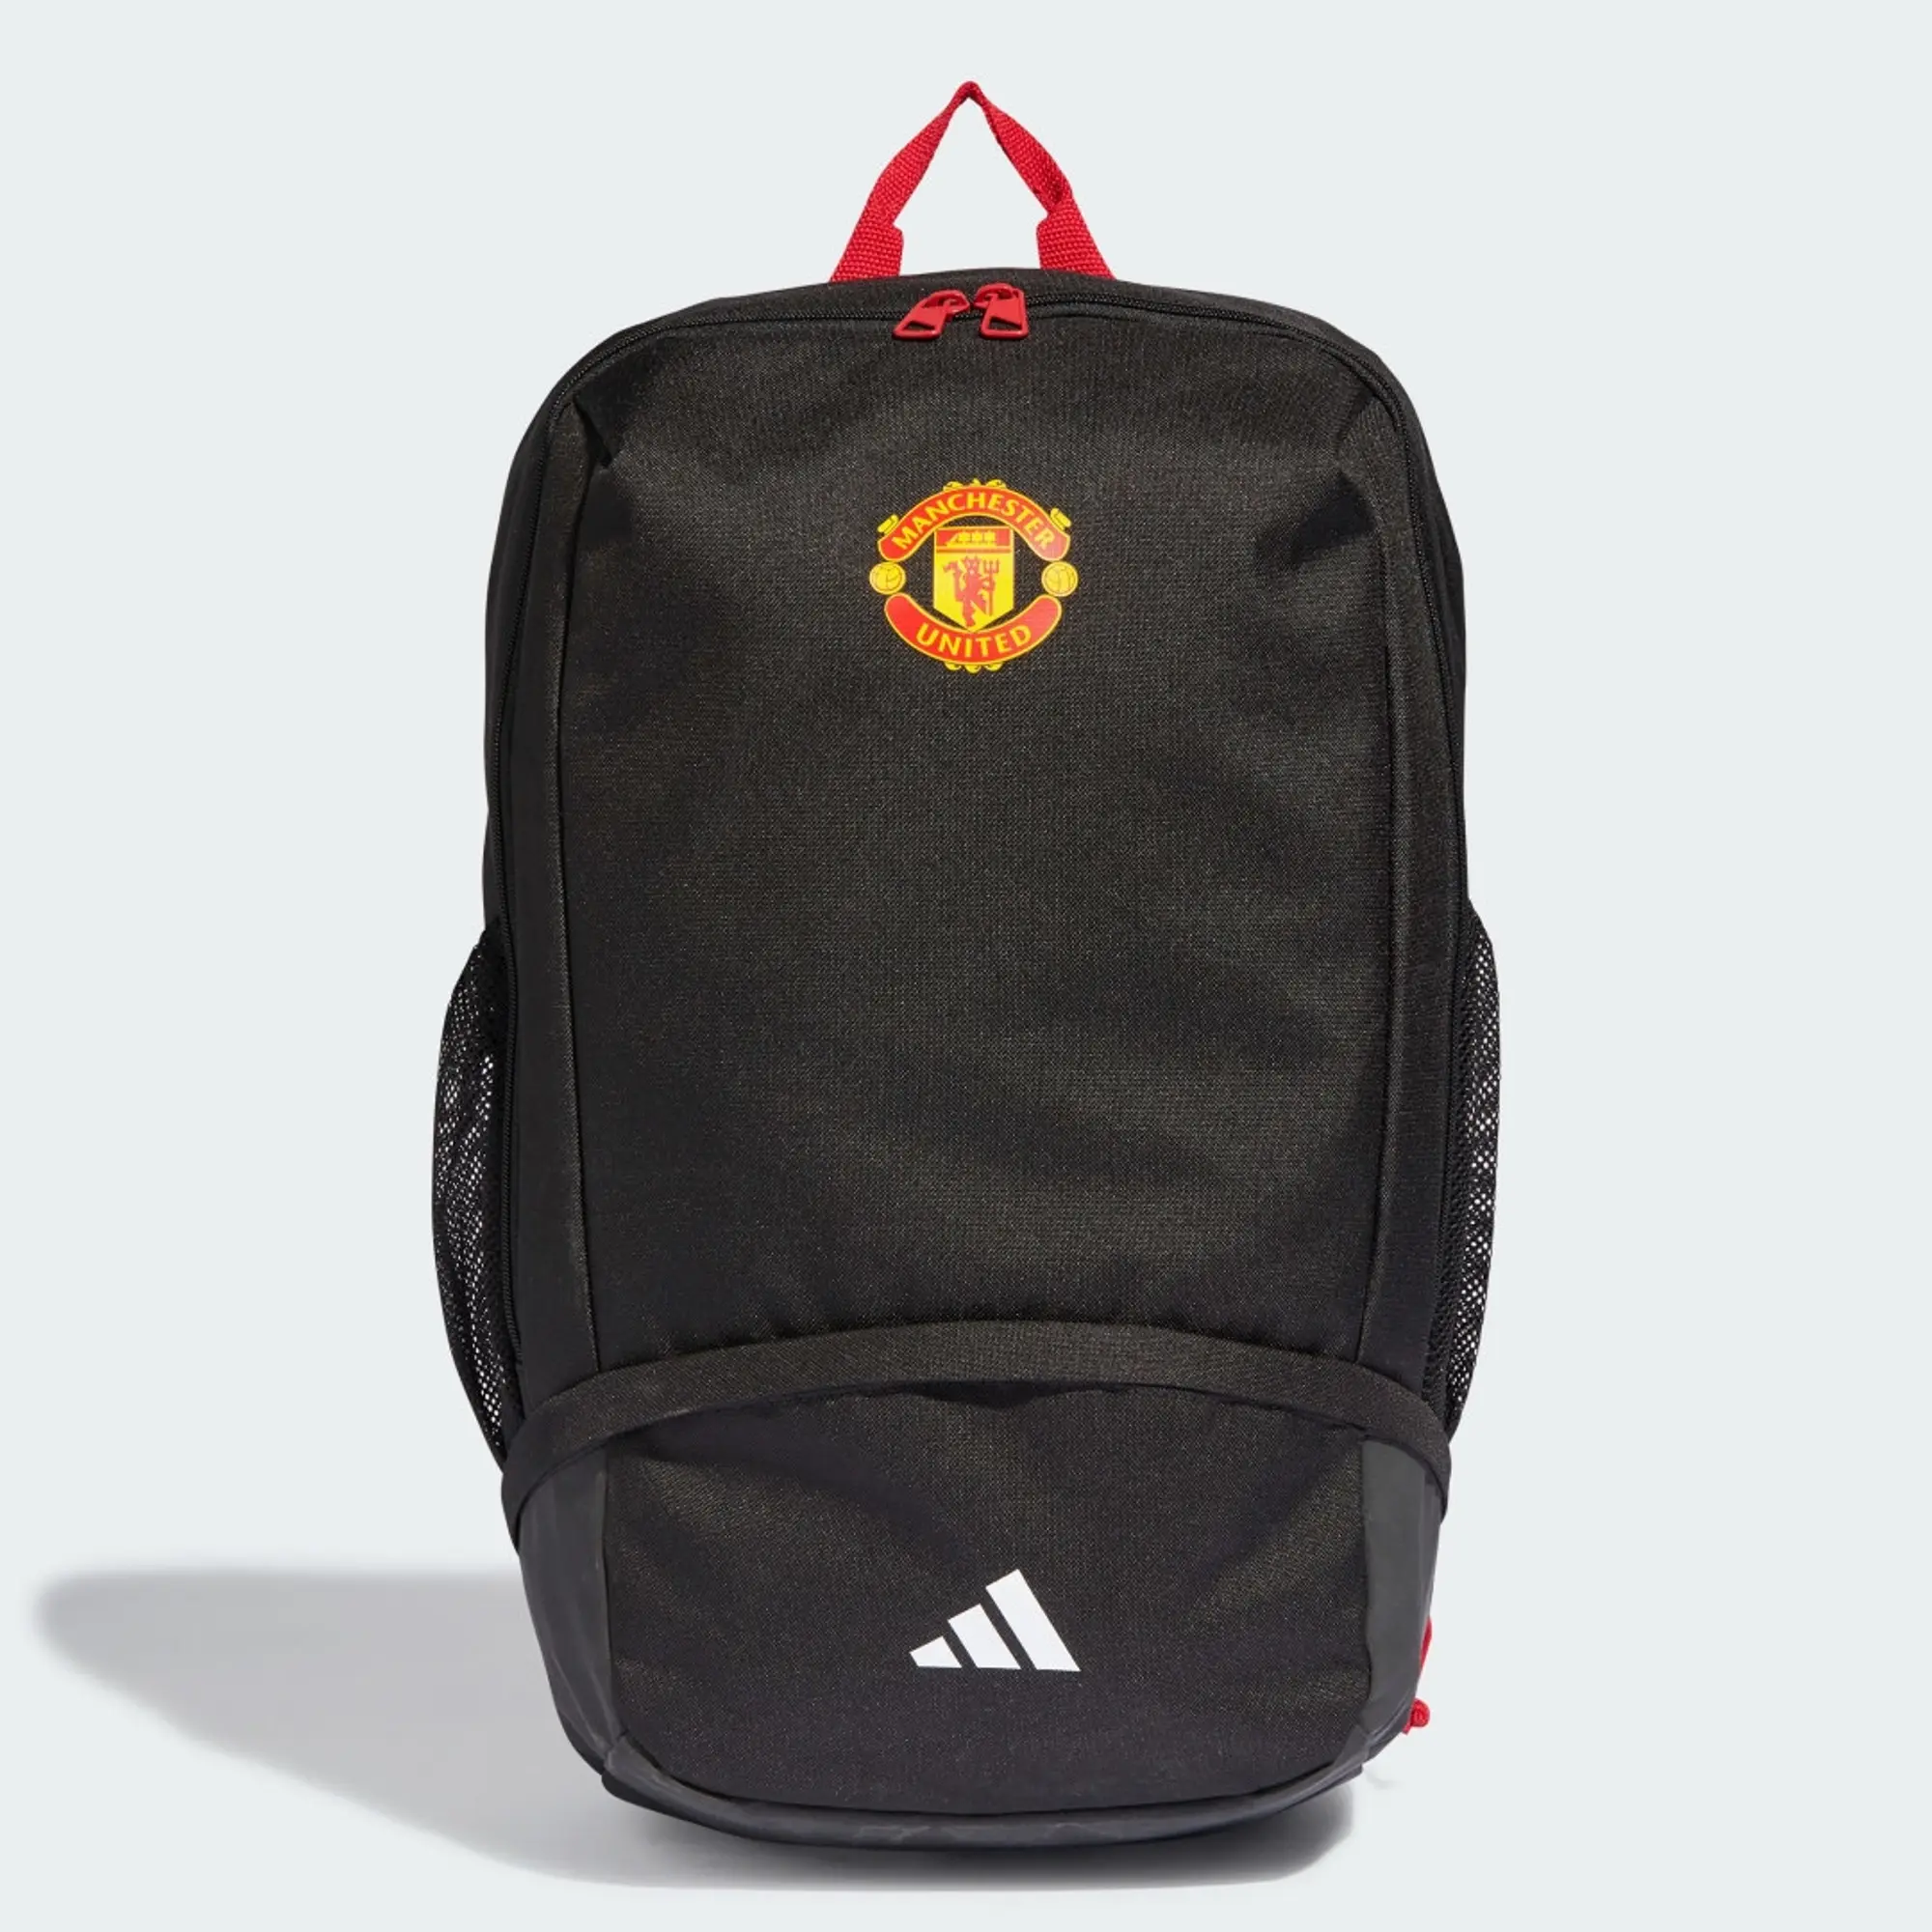 adidas Manchester United Backpack - Black/Real Red - Black